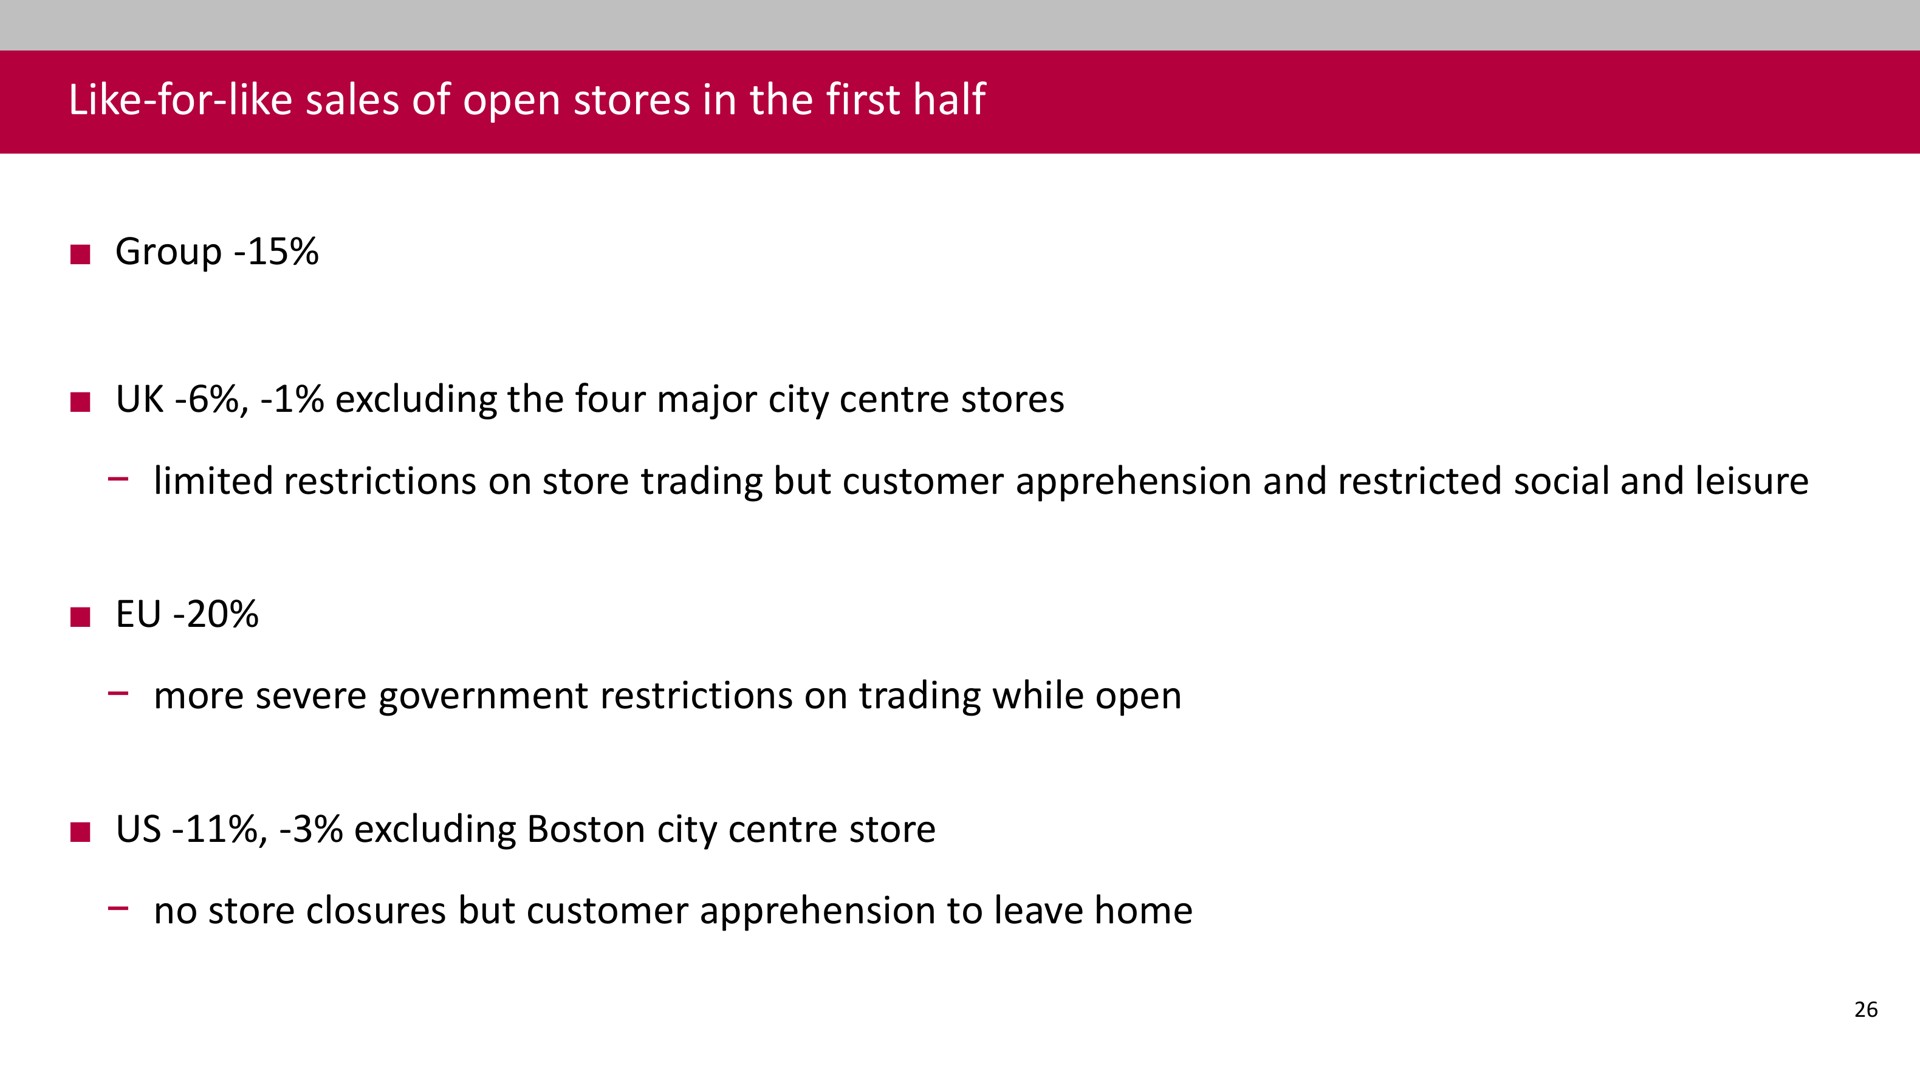 like for like sales of open stores in the first half group excluding the four major city stores limited restrictions on store trading but customer apprehension and restricted social and leisure more severe government restrictions on trading while open us excluding boston city store no store closures but customer apprehension to leave home | Associated British Foods